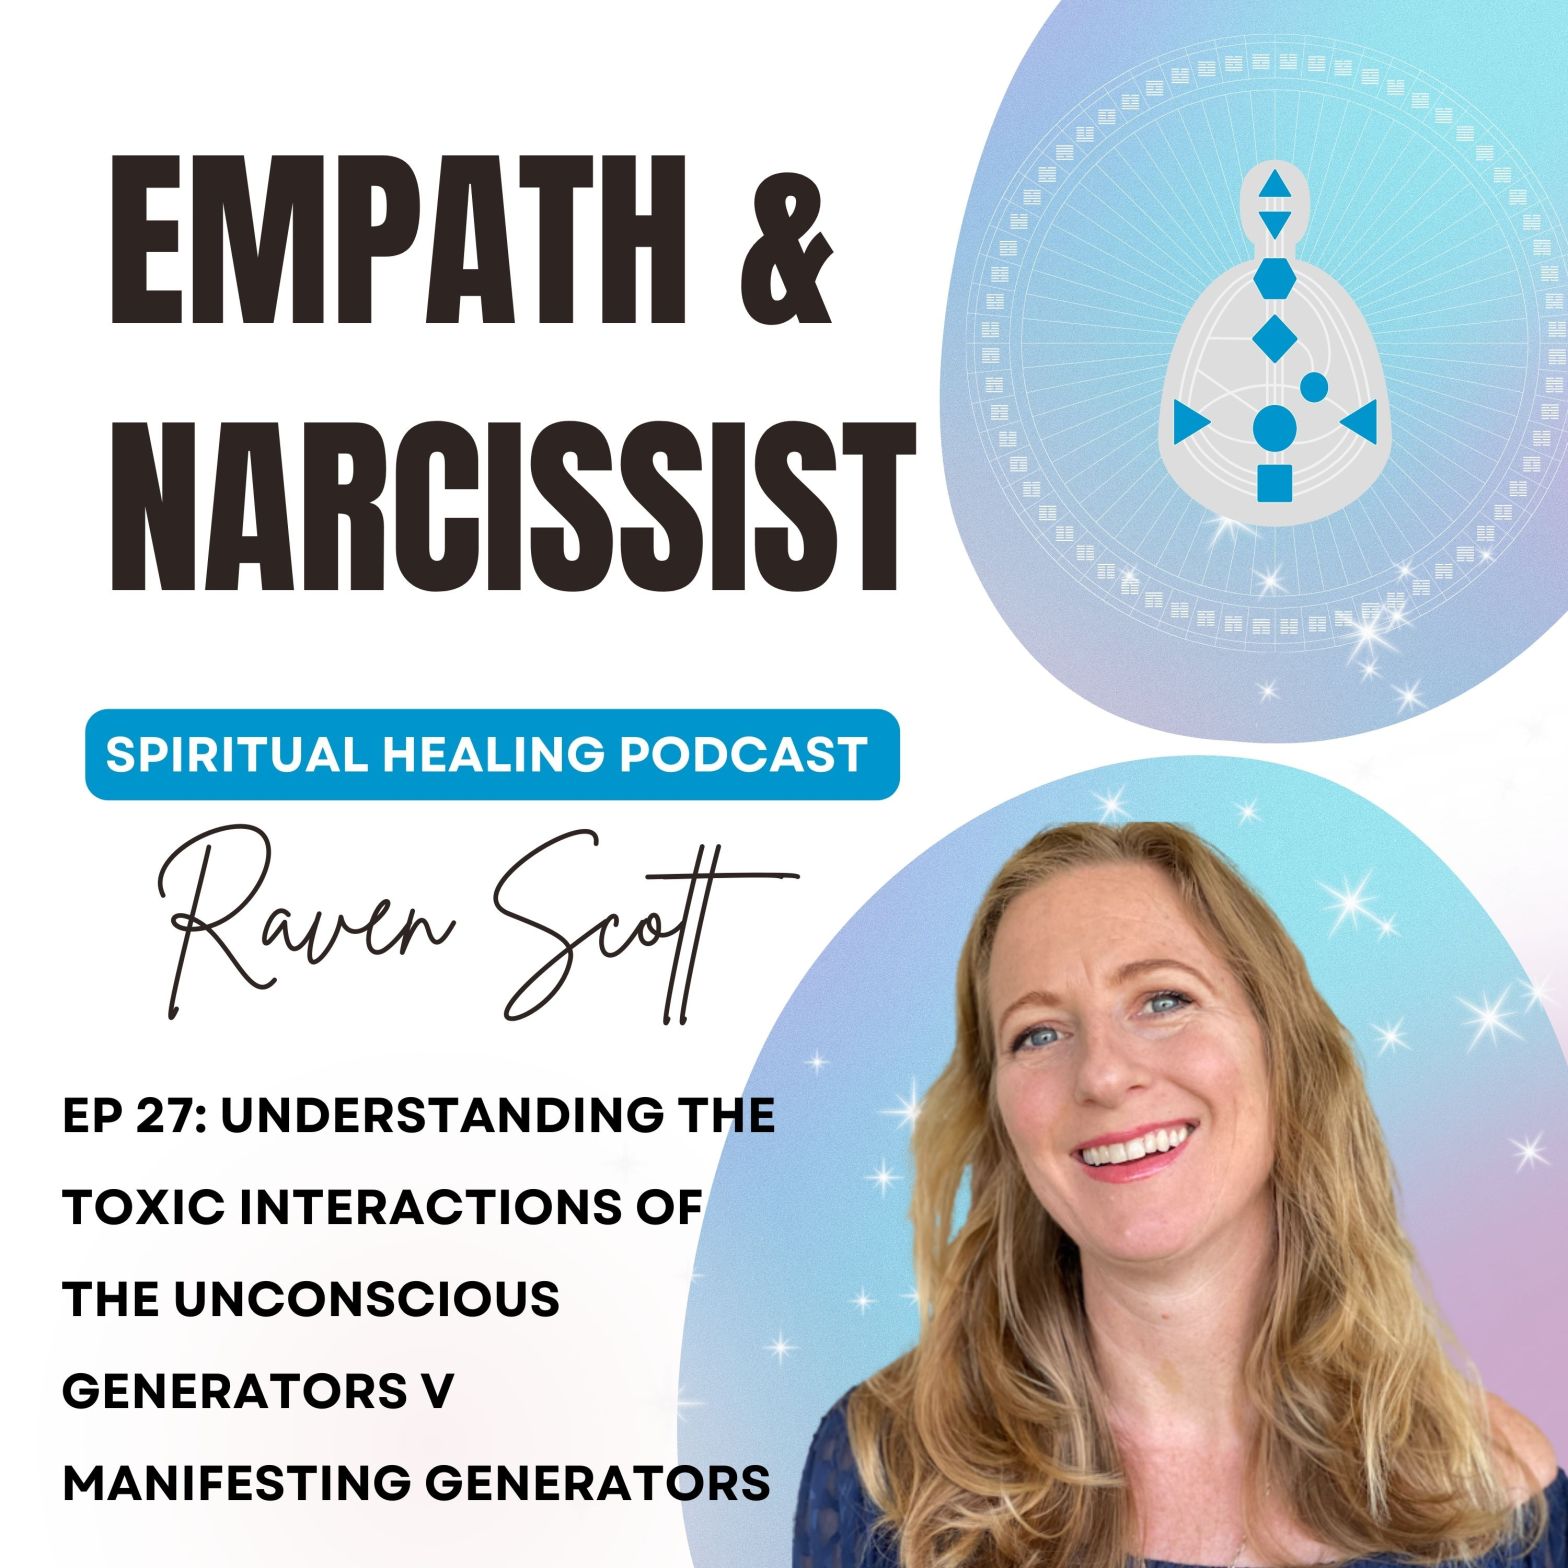 white and blue gradient with black text Empath and the Narcissist spiritual healing podcast Raven Scott Ep 27 Toxic interactions with human design types generator v manifesting generator